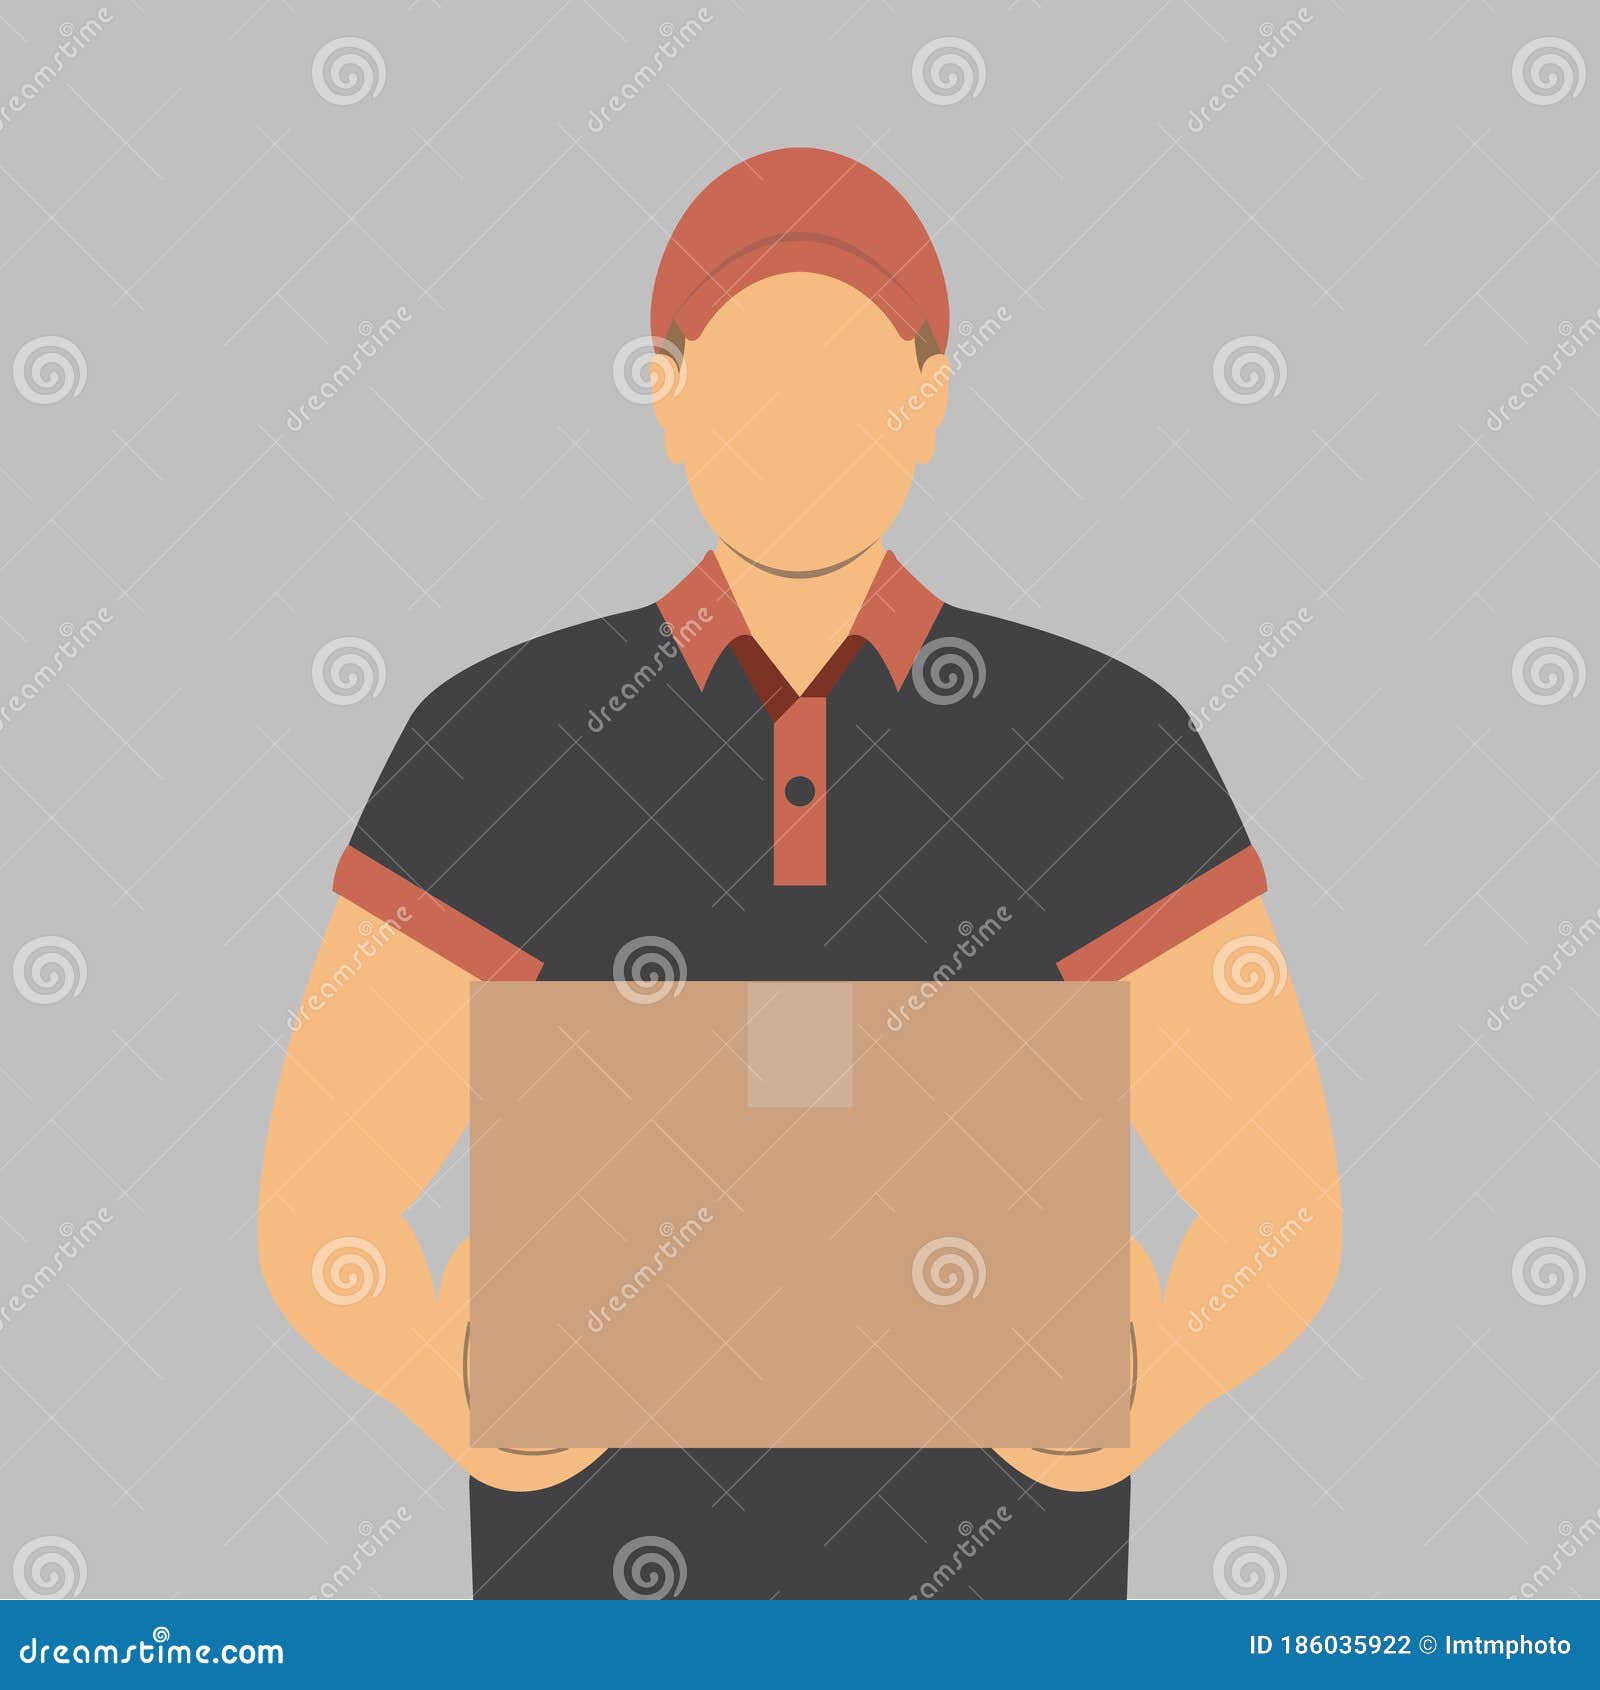 Delivery Man Delivering A Package Stock Vector Illustration Of